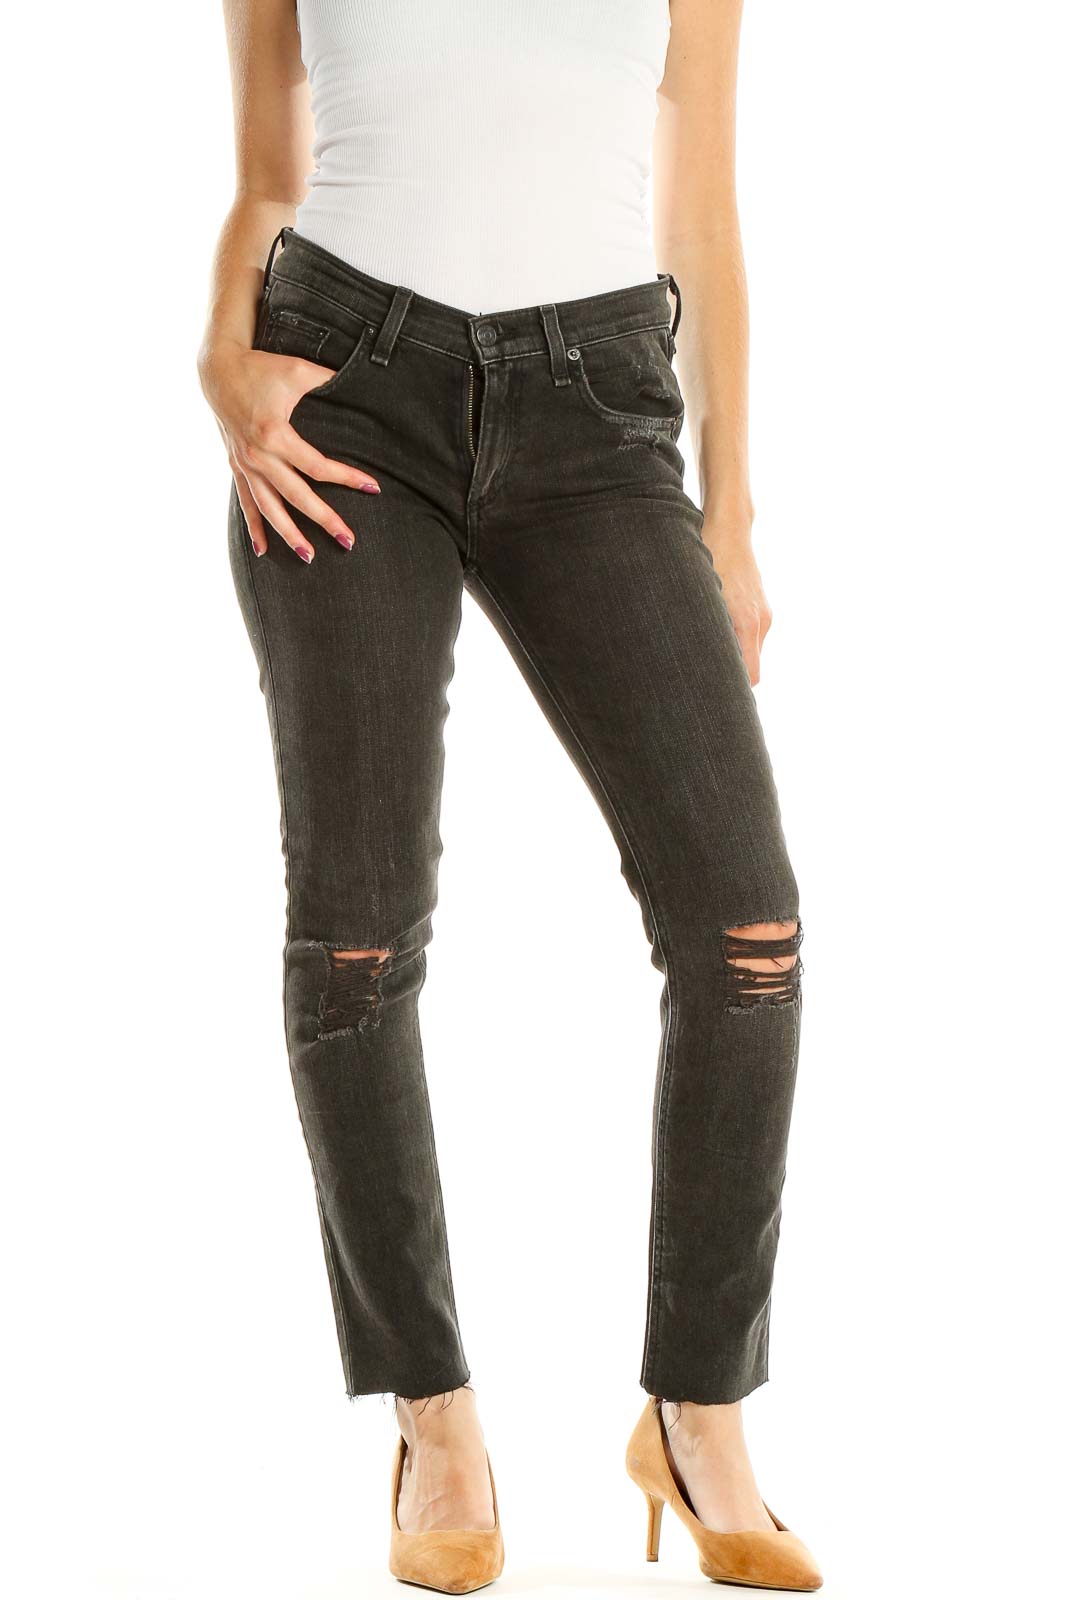 Black Distressed Straight Leg Jeans Front